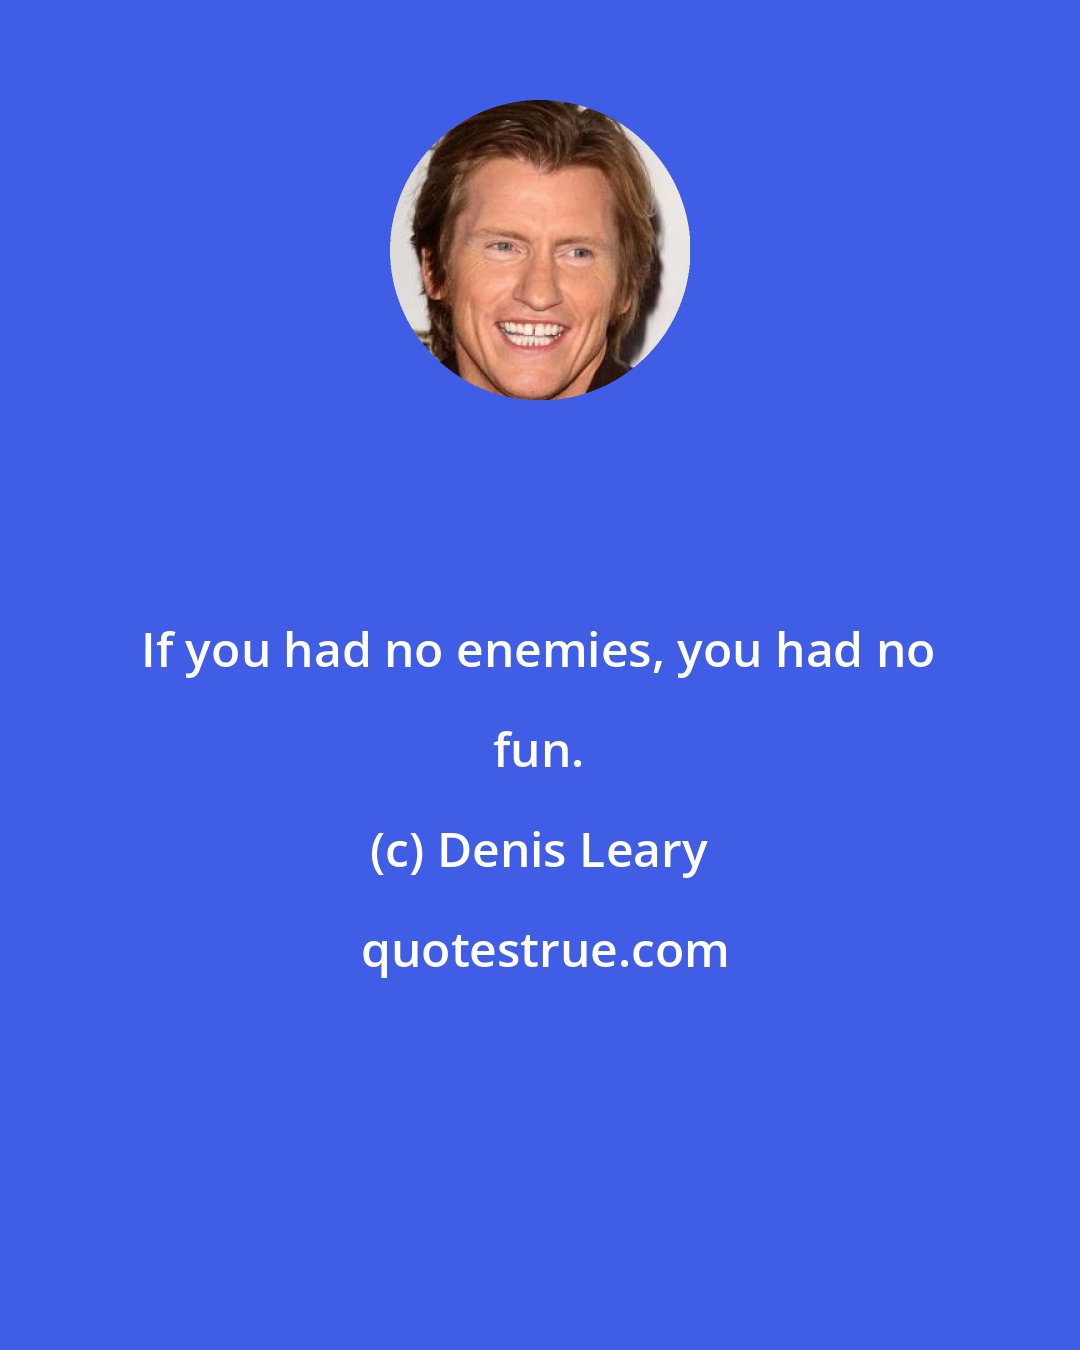 Denis Leary: If you had no enemies, you had no fun.